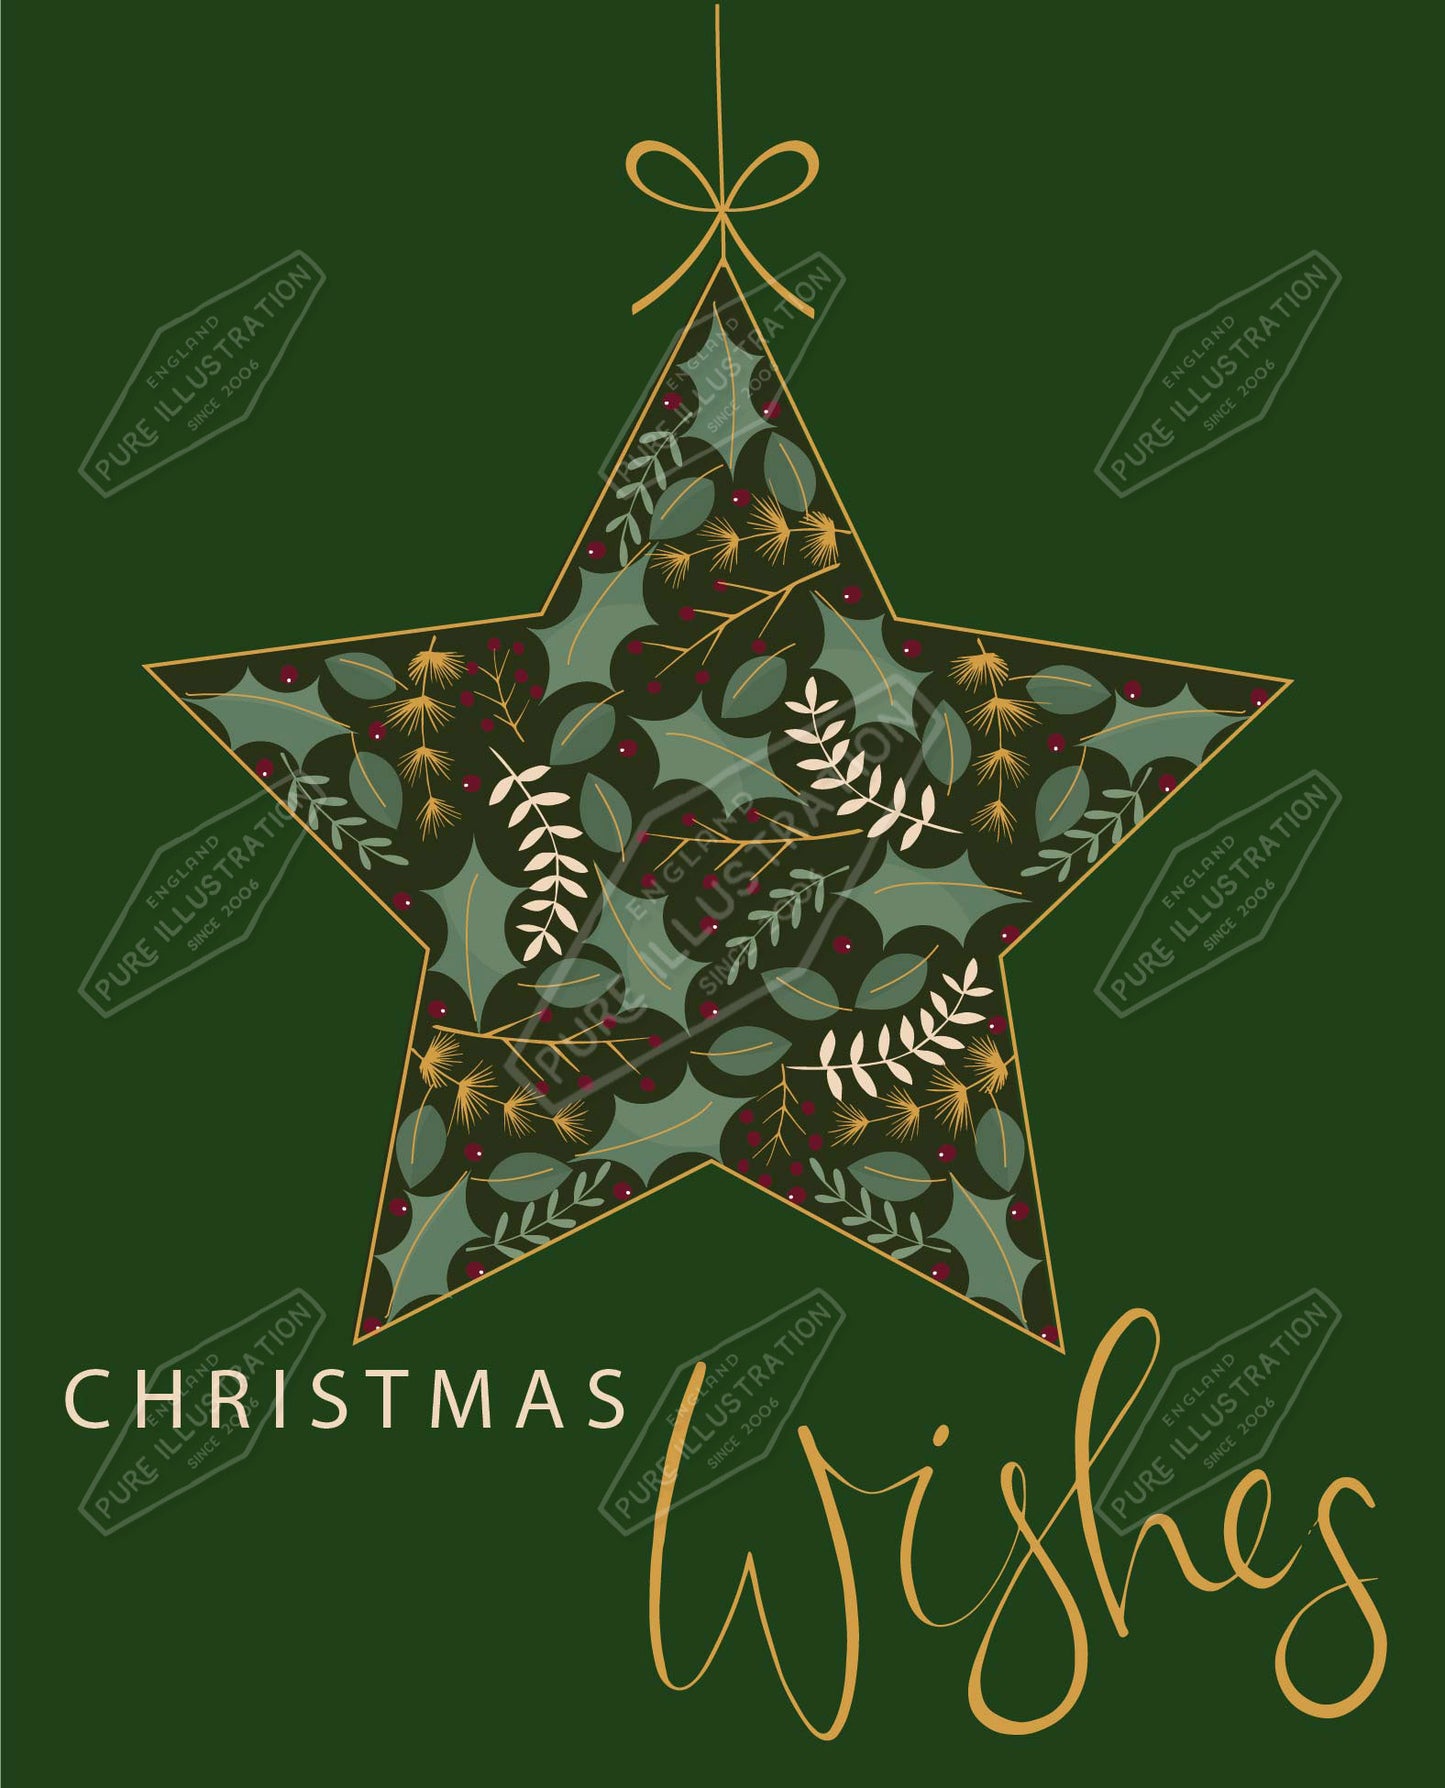 00035276SPI- Sarah Pitt is represented by Pure Art Licensing Agency - Christmas Greeting Card Design